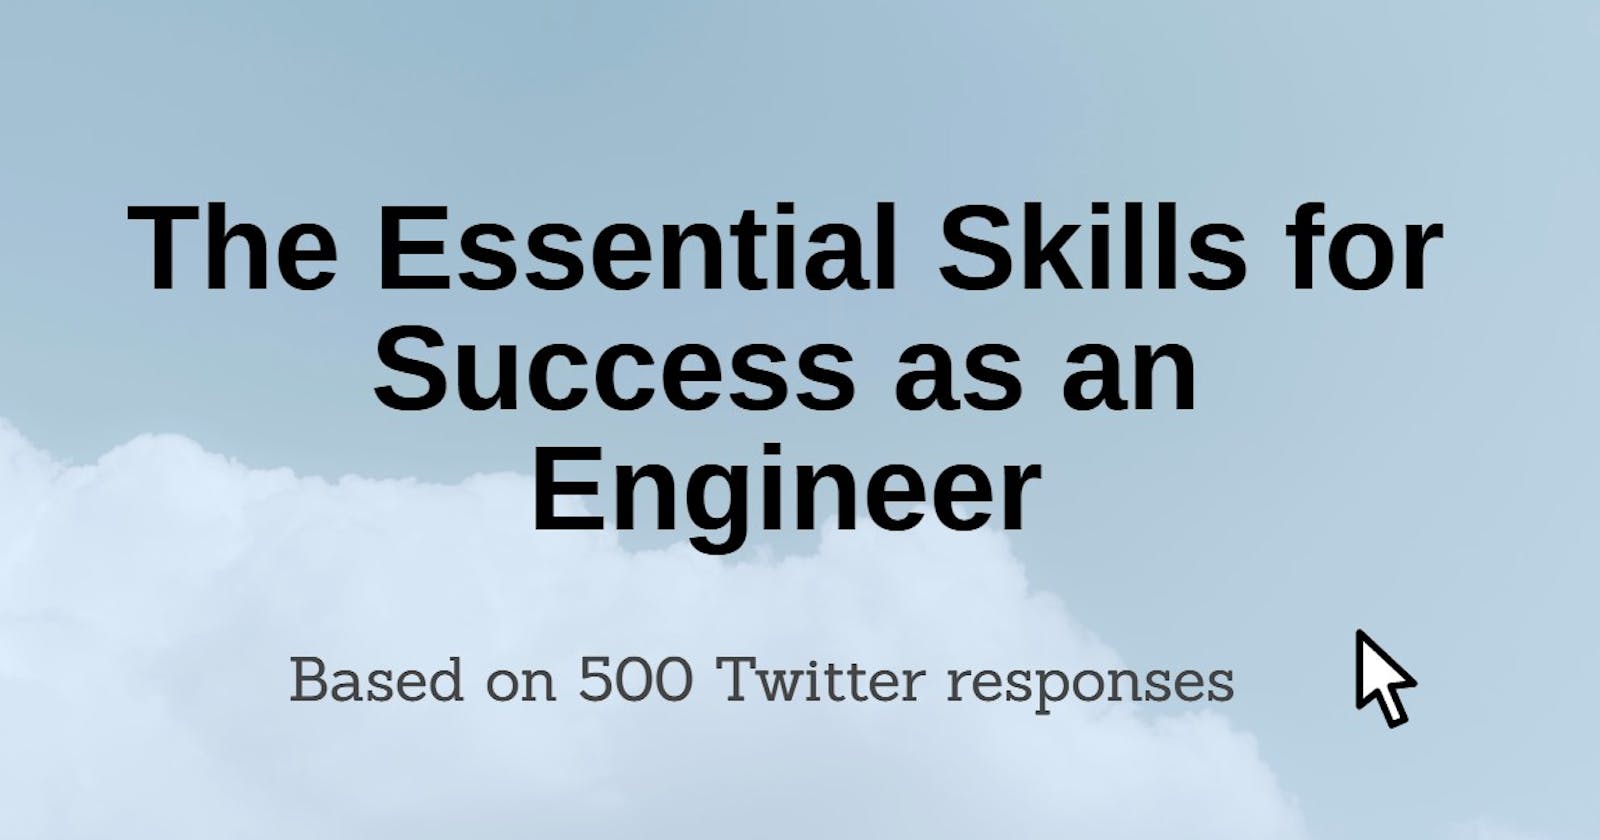 The Essential Skills for Success as an Engineer, based on 500 responses